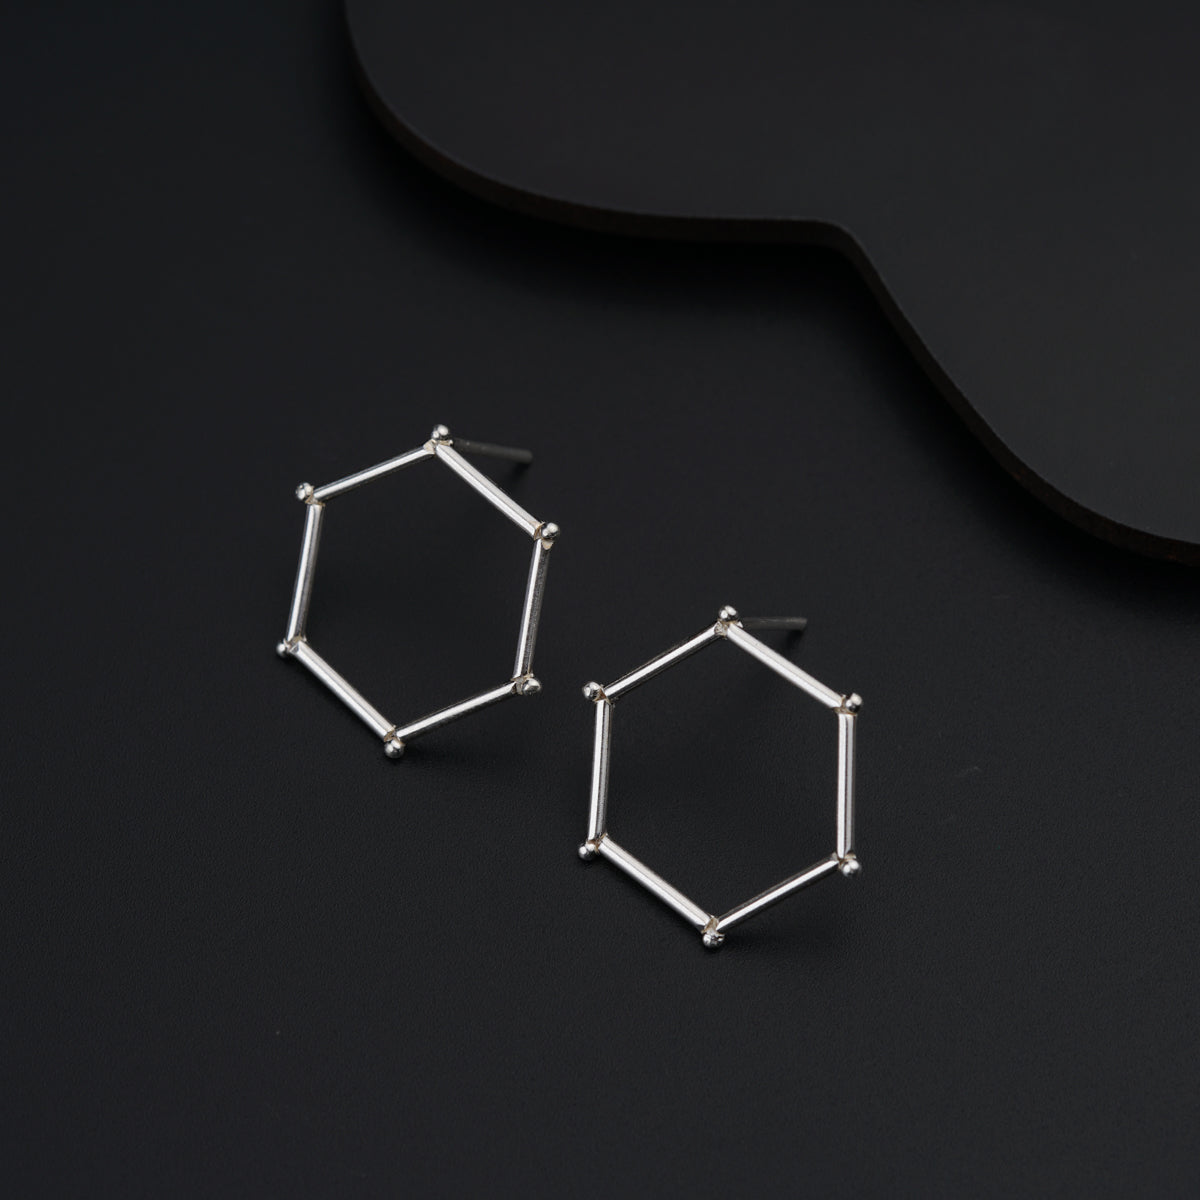 a pair of silver hexagonal earrings on a black surface